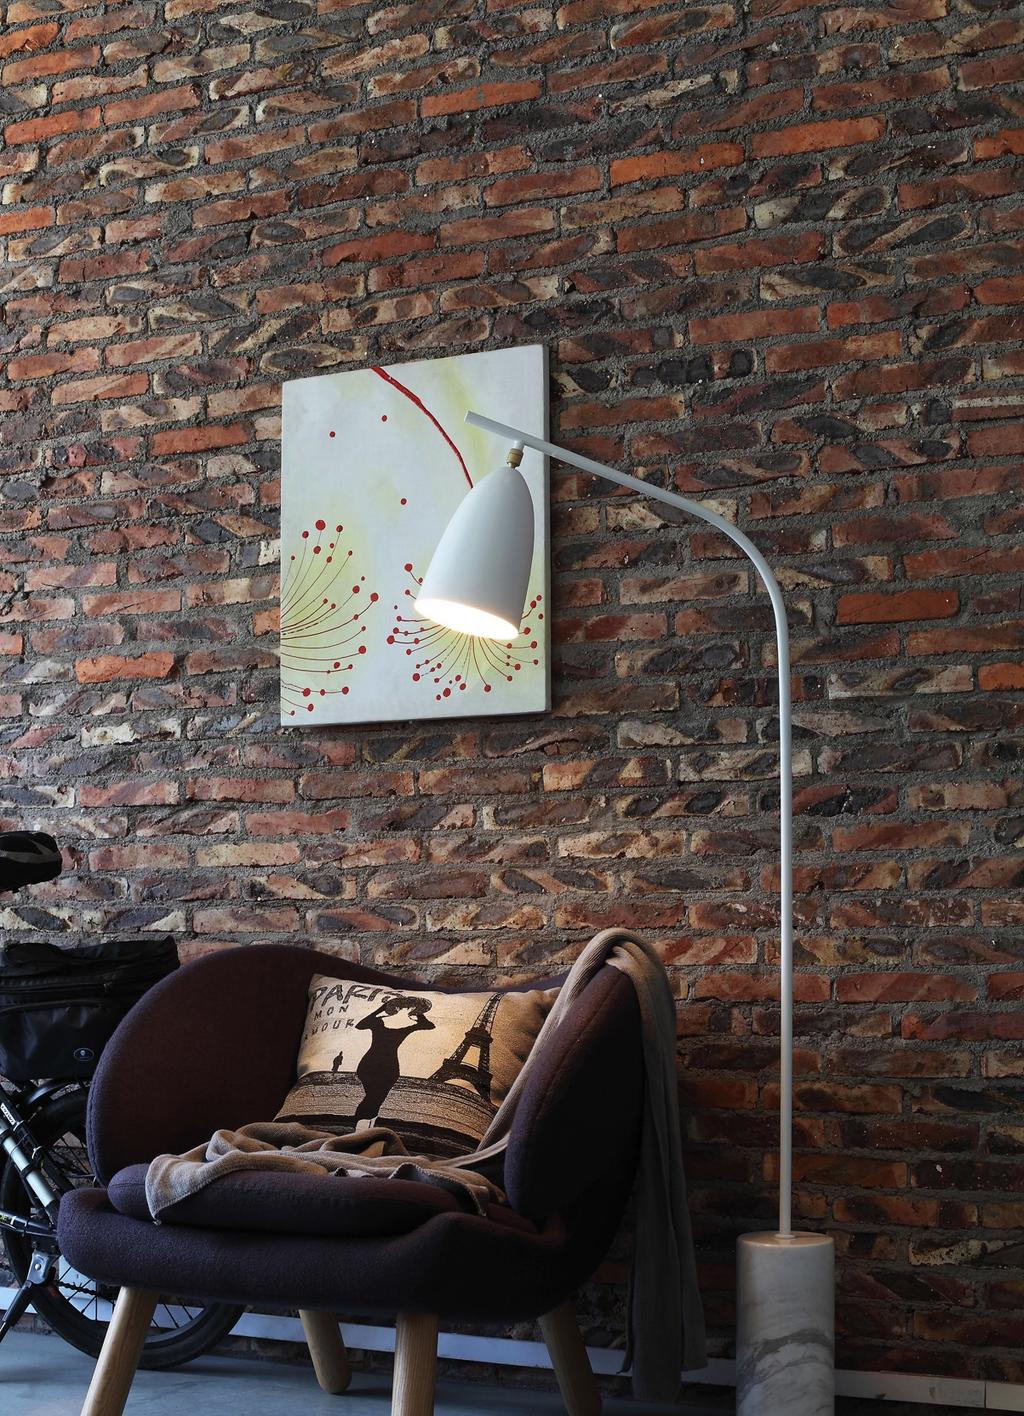 ART. NO. 1600007 1600008 1600009 1600010 MEL FLOOR LAMP Cable length 265 cm, from switch to plug 180 cm.